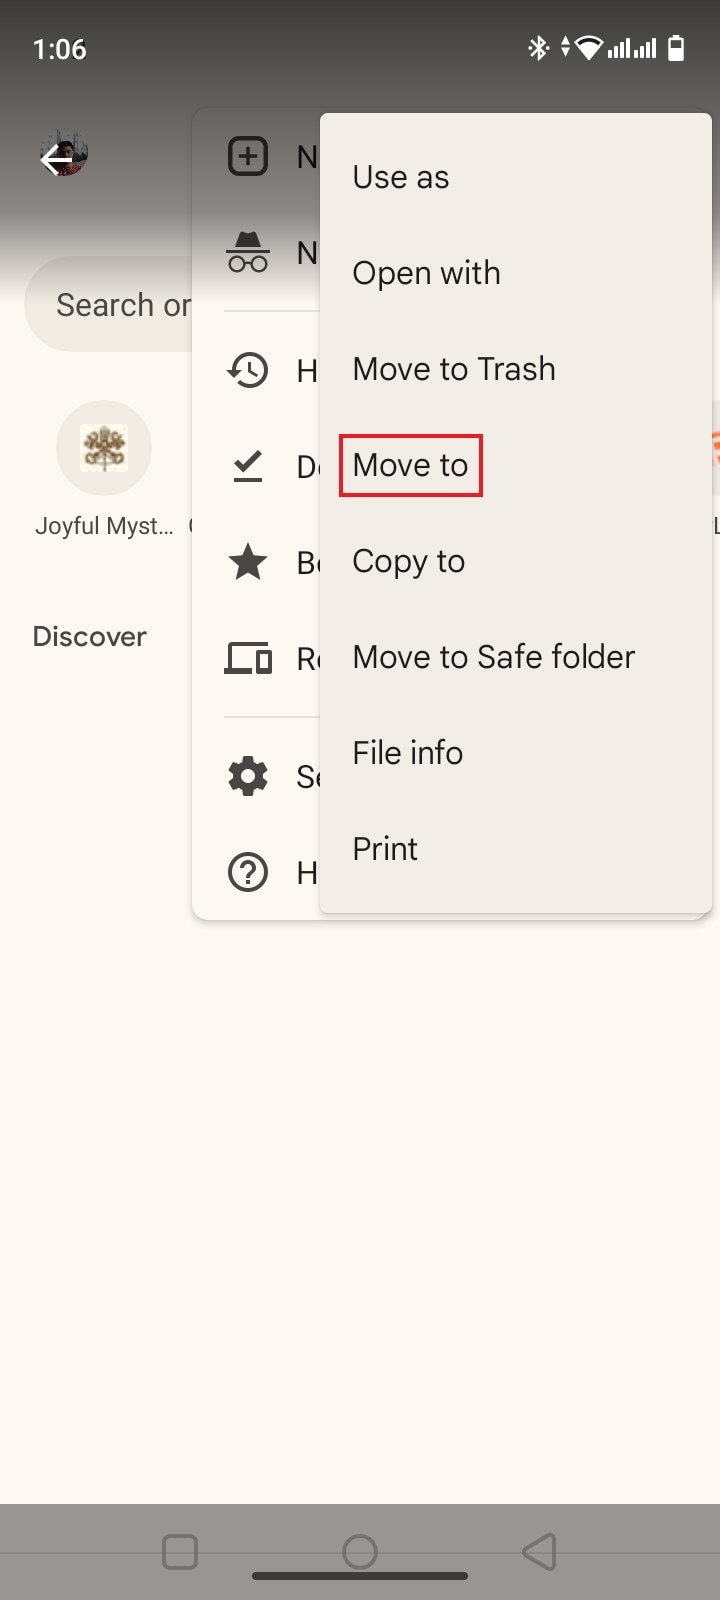 move images to folder